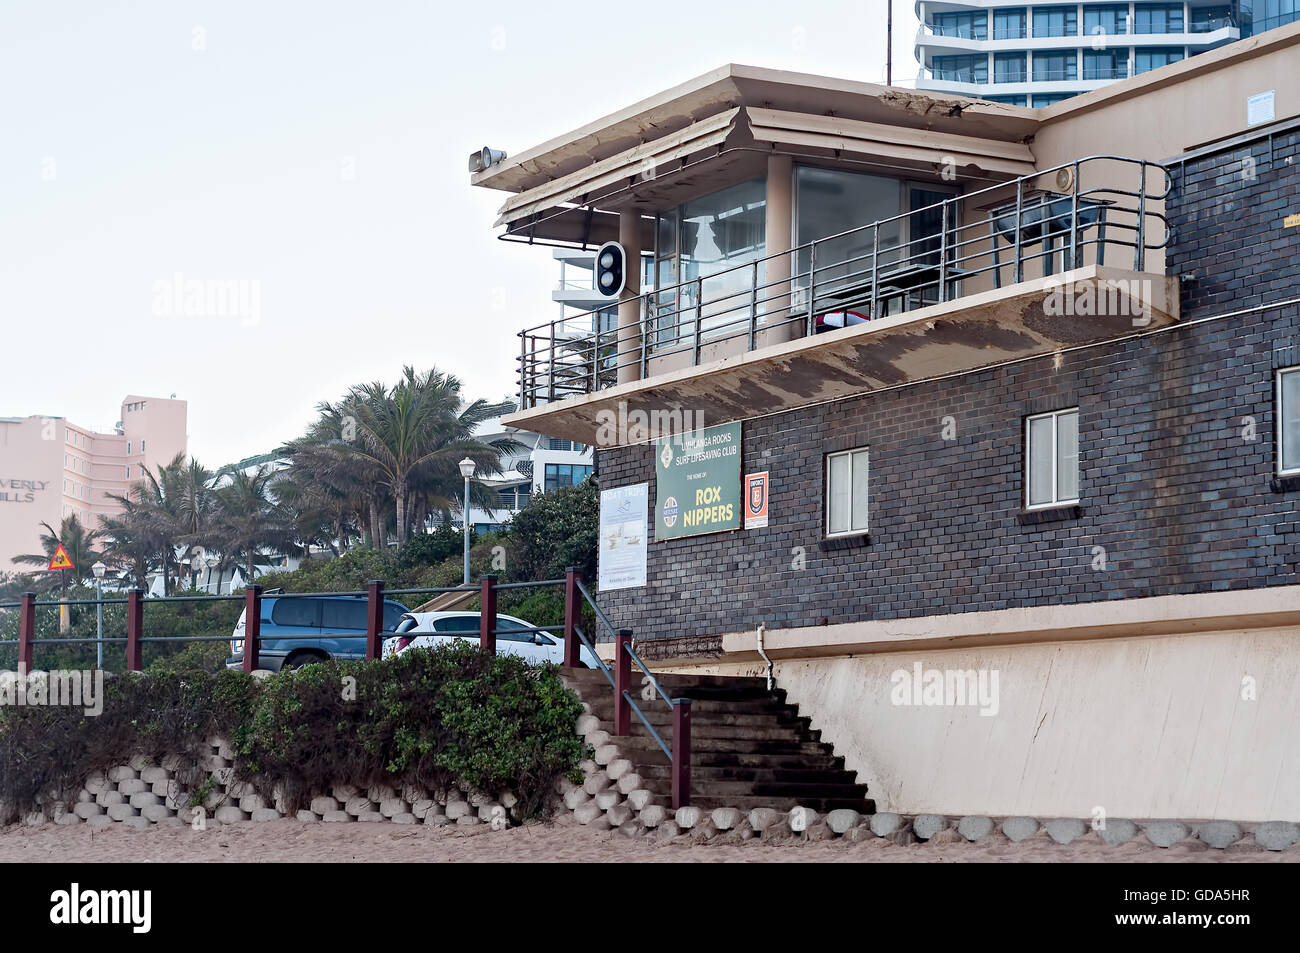 DURBAN, SOUTH AFRICA - JULY 09, 2016: The Grannies Pool lifesaver's station on the Umhlanga Rocks beach Stock Photo